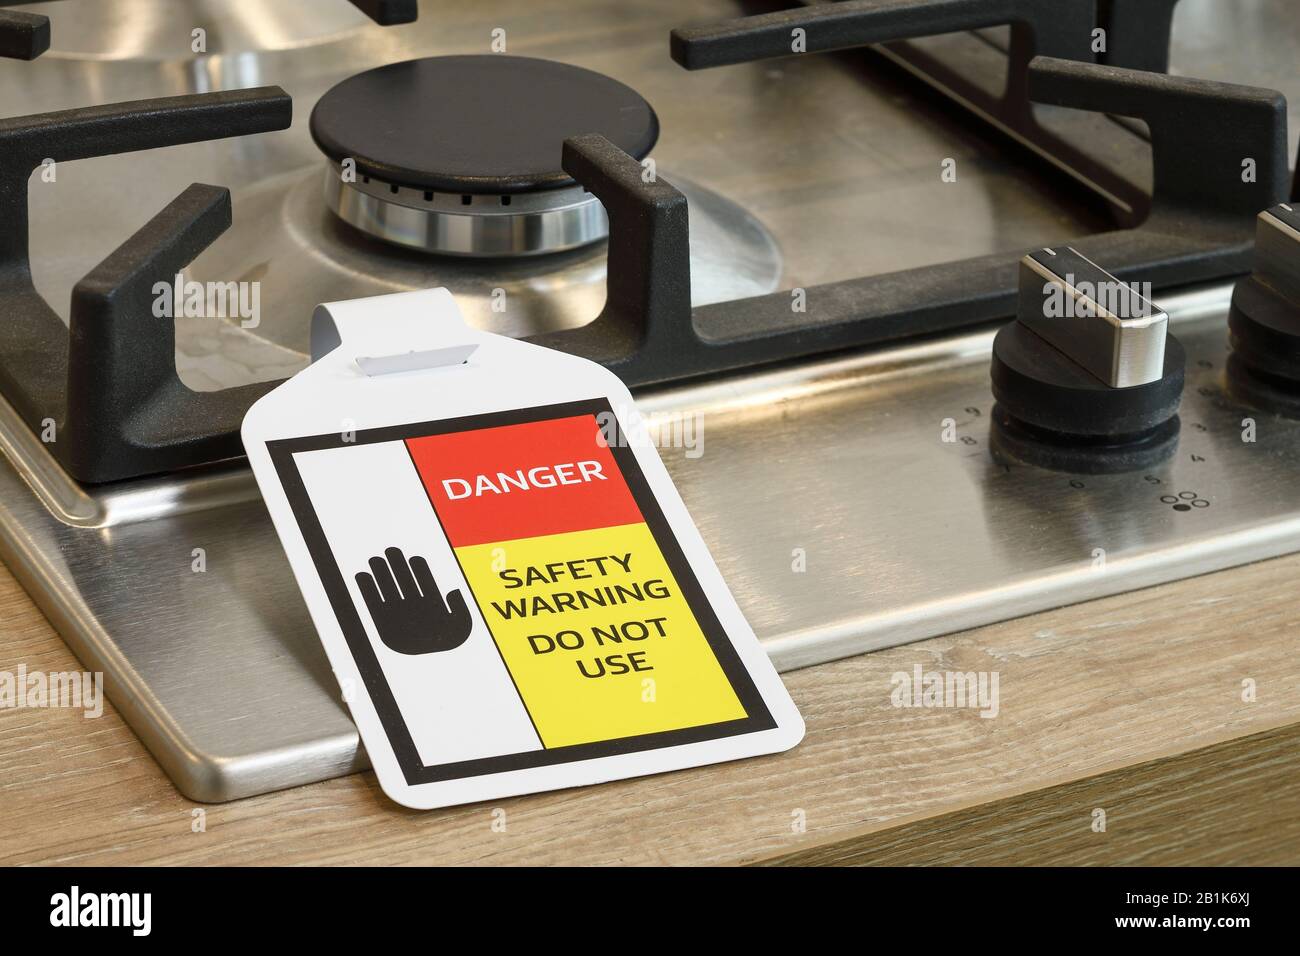 A Danger Safety Warning label attached to a UK domestic gas hob Stock Photo